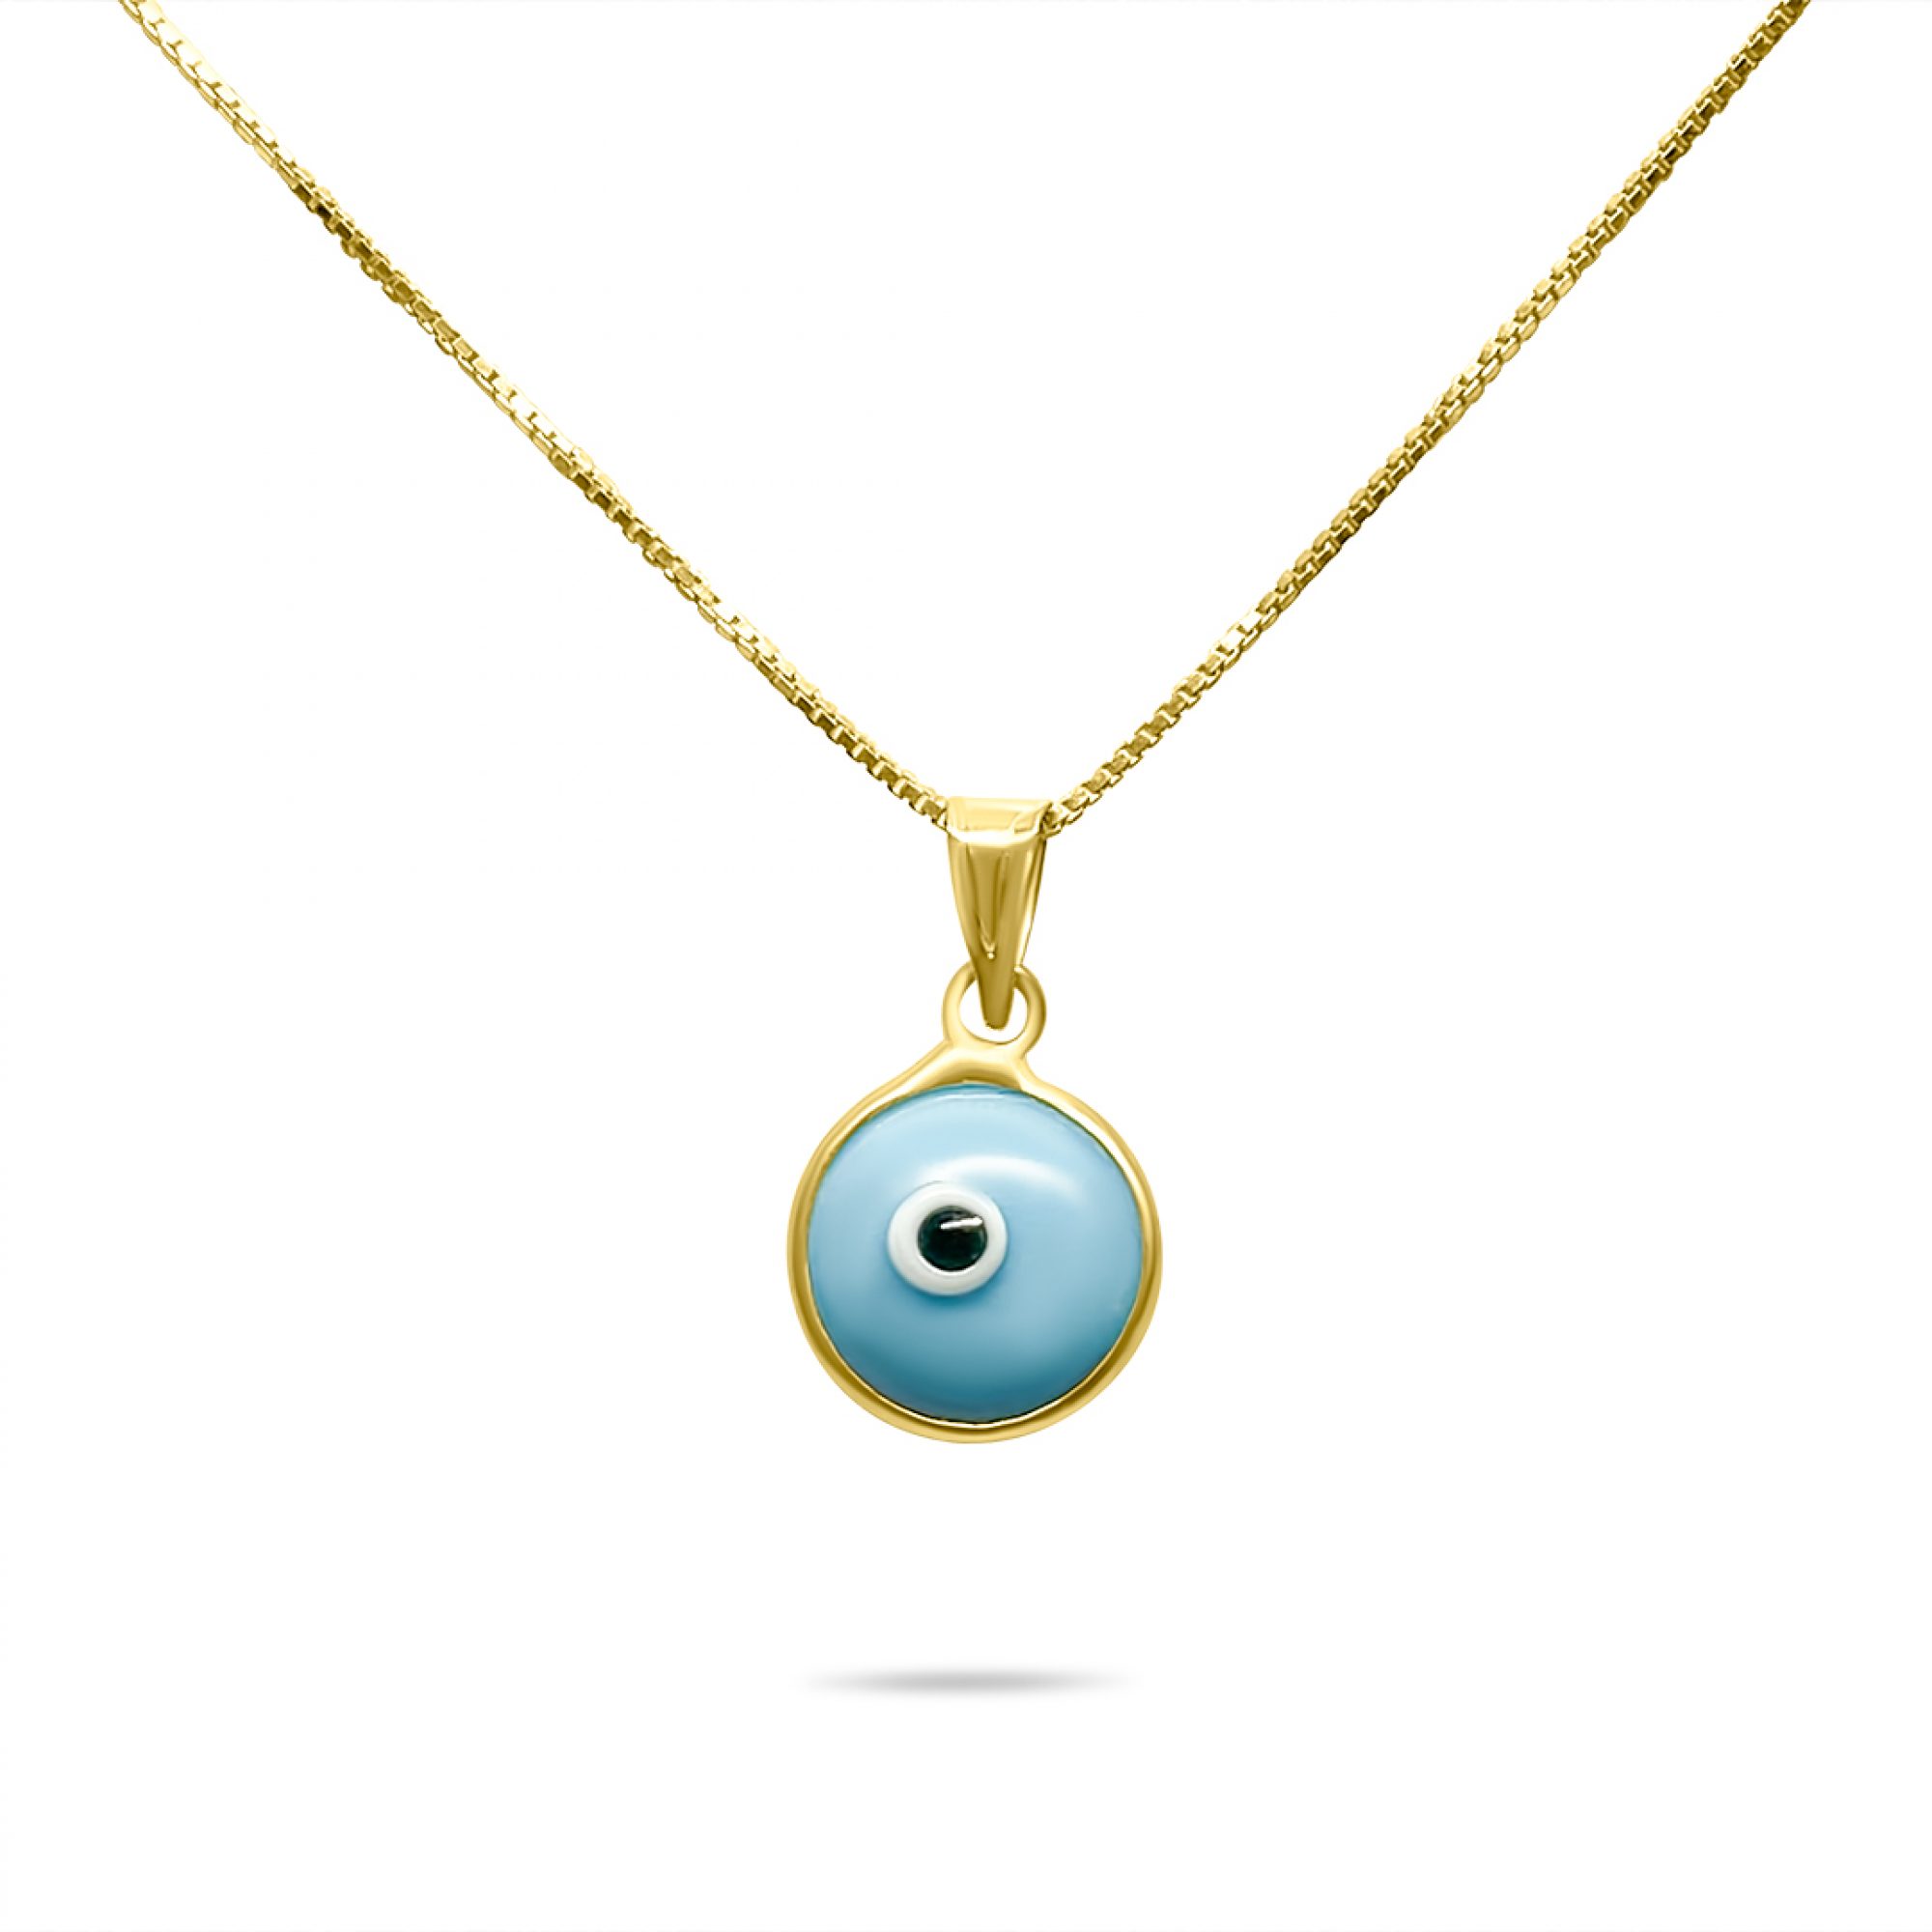 Gold plated turquoise eye necklace